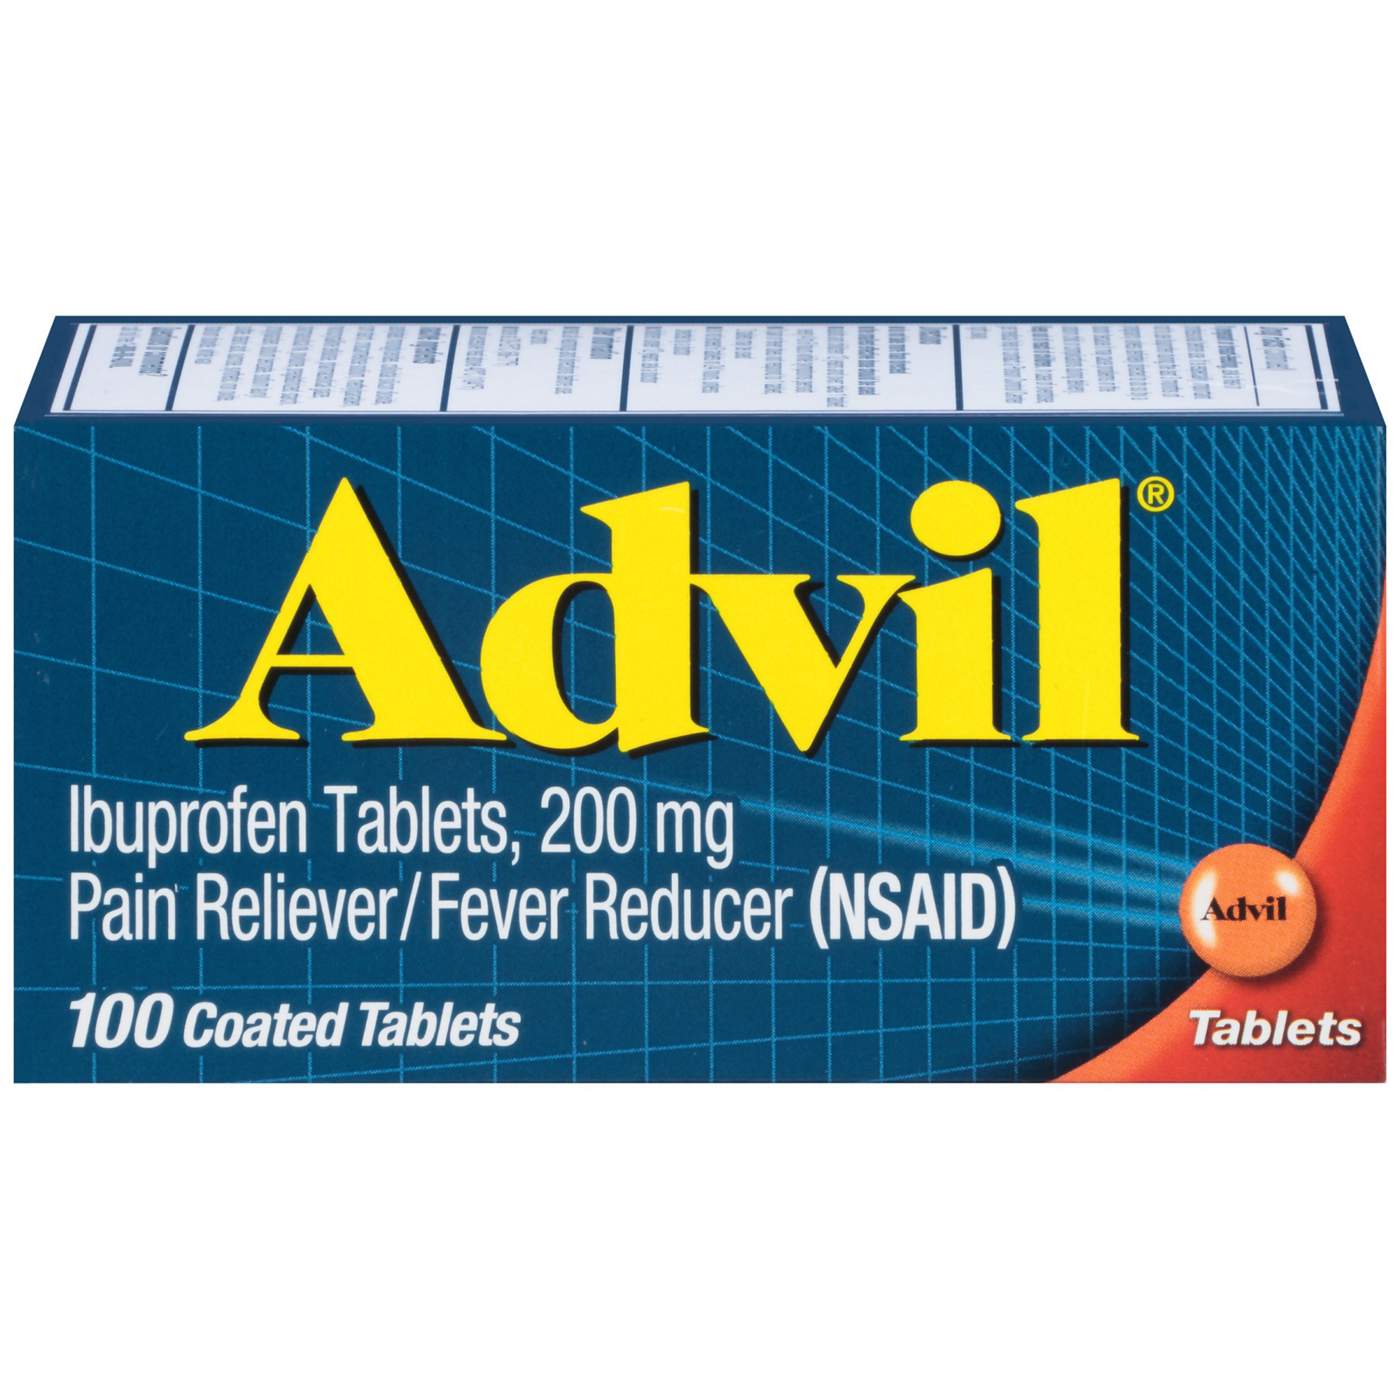 Advil Temporary Pain Relief Ibuprofen 200 Mg Coated Tablets; image 1 of 9